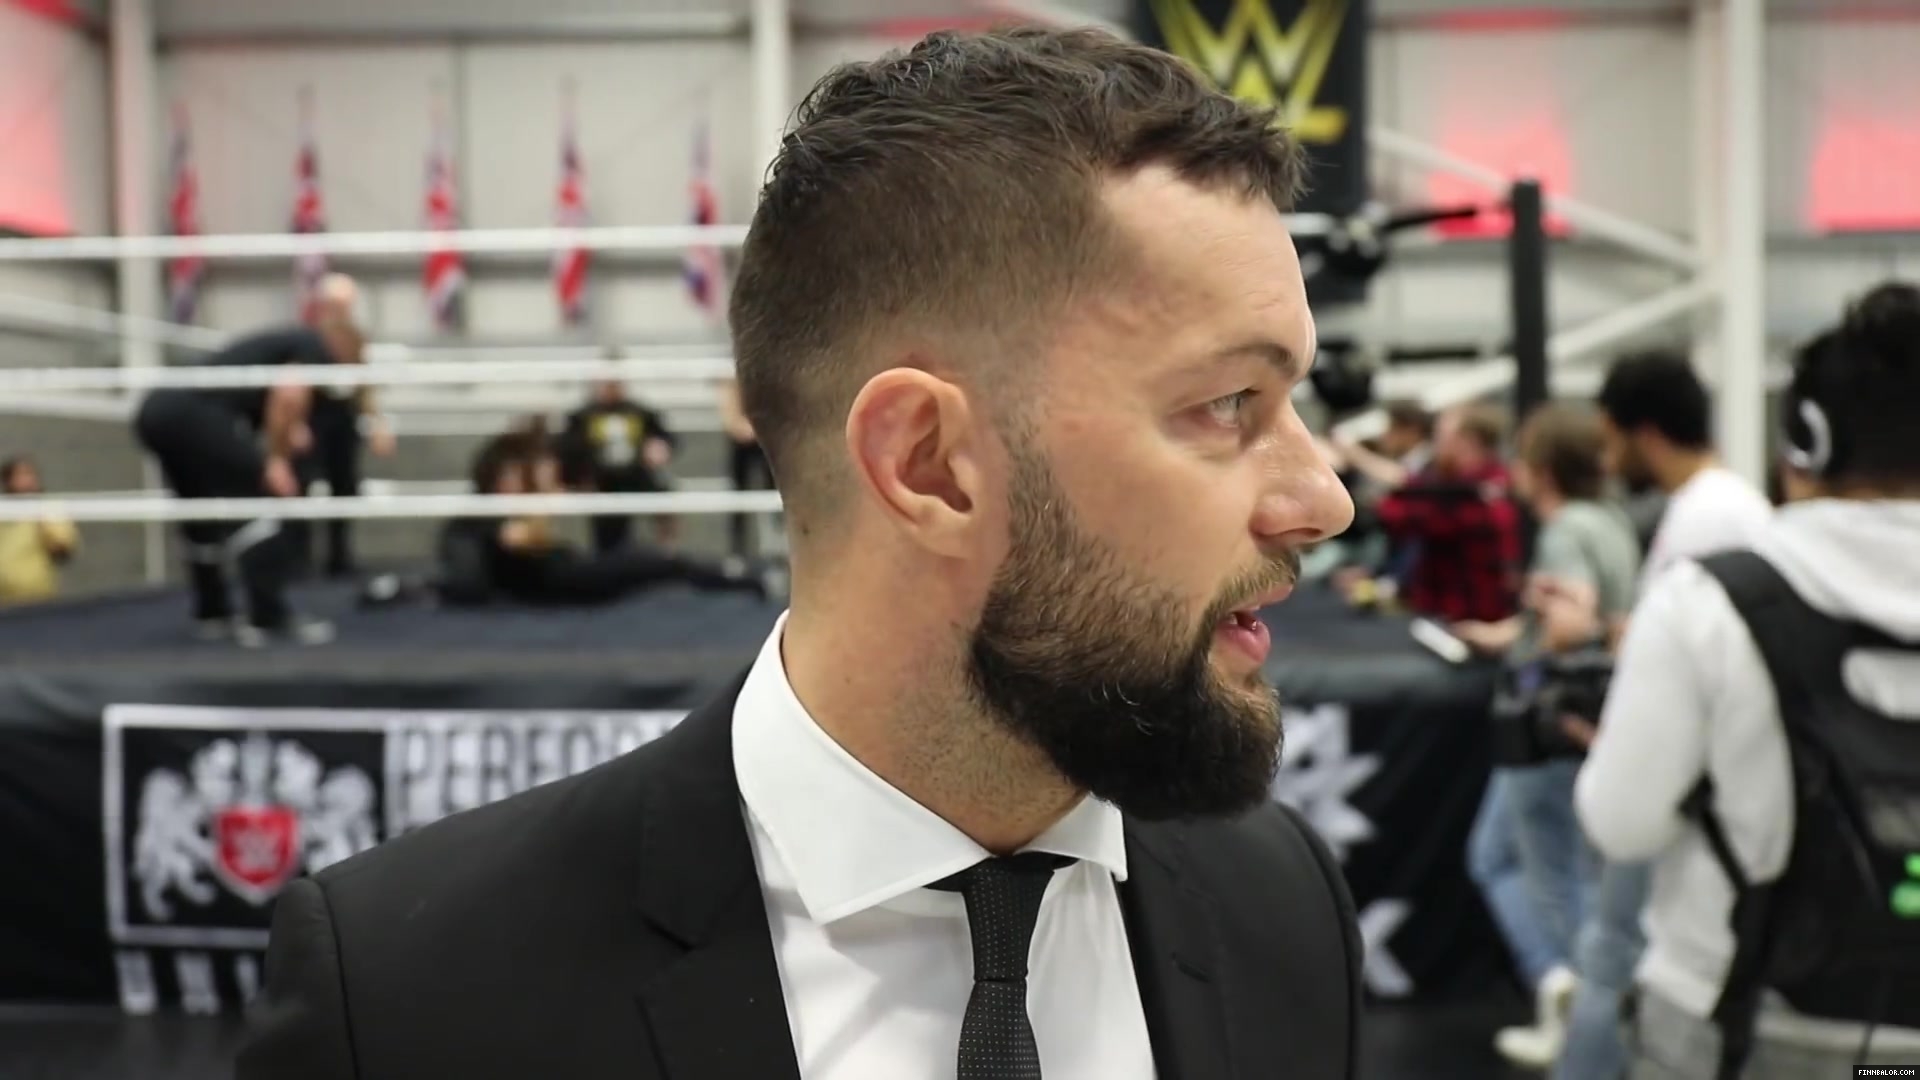 WWE_Superstar_FINN_BALOR_joins_MOUSTACHE_MOUNTAIN_at_the_opening_of_the_NXT_UK_PC_142.jpg